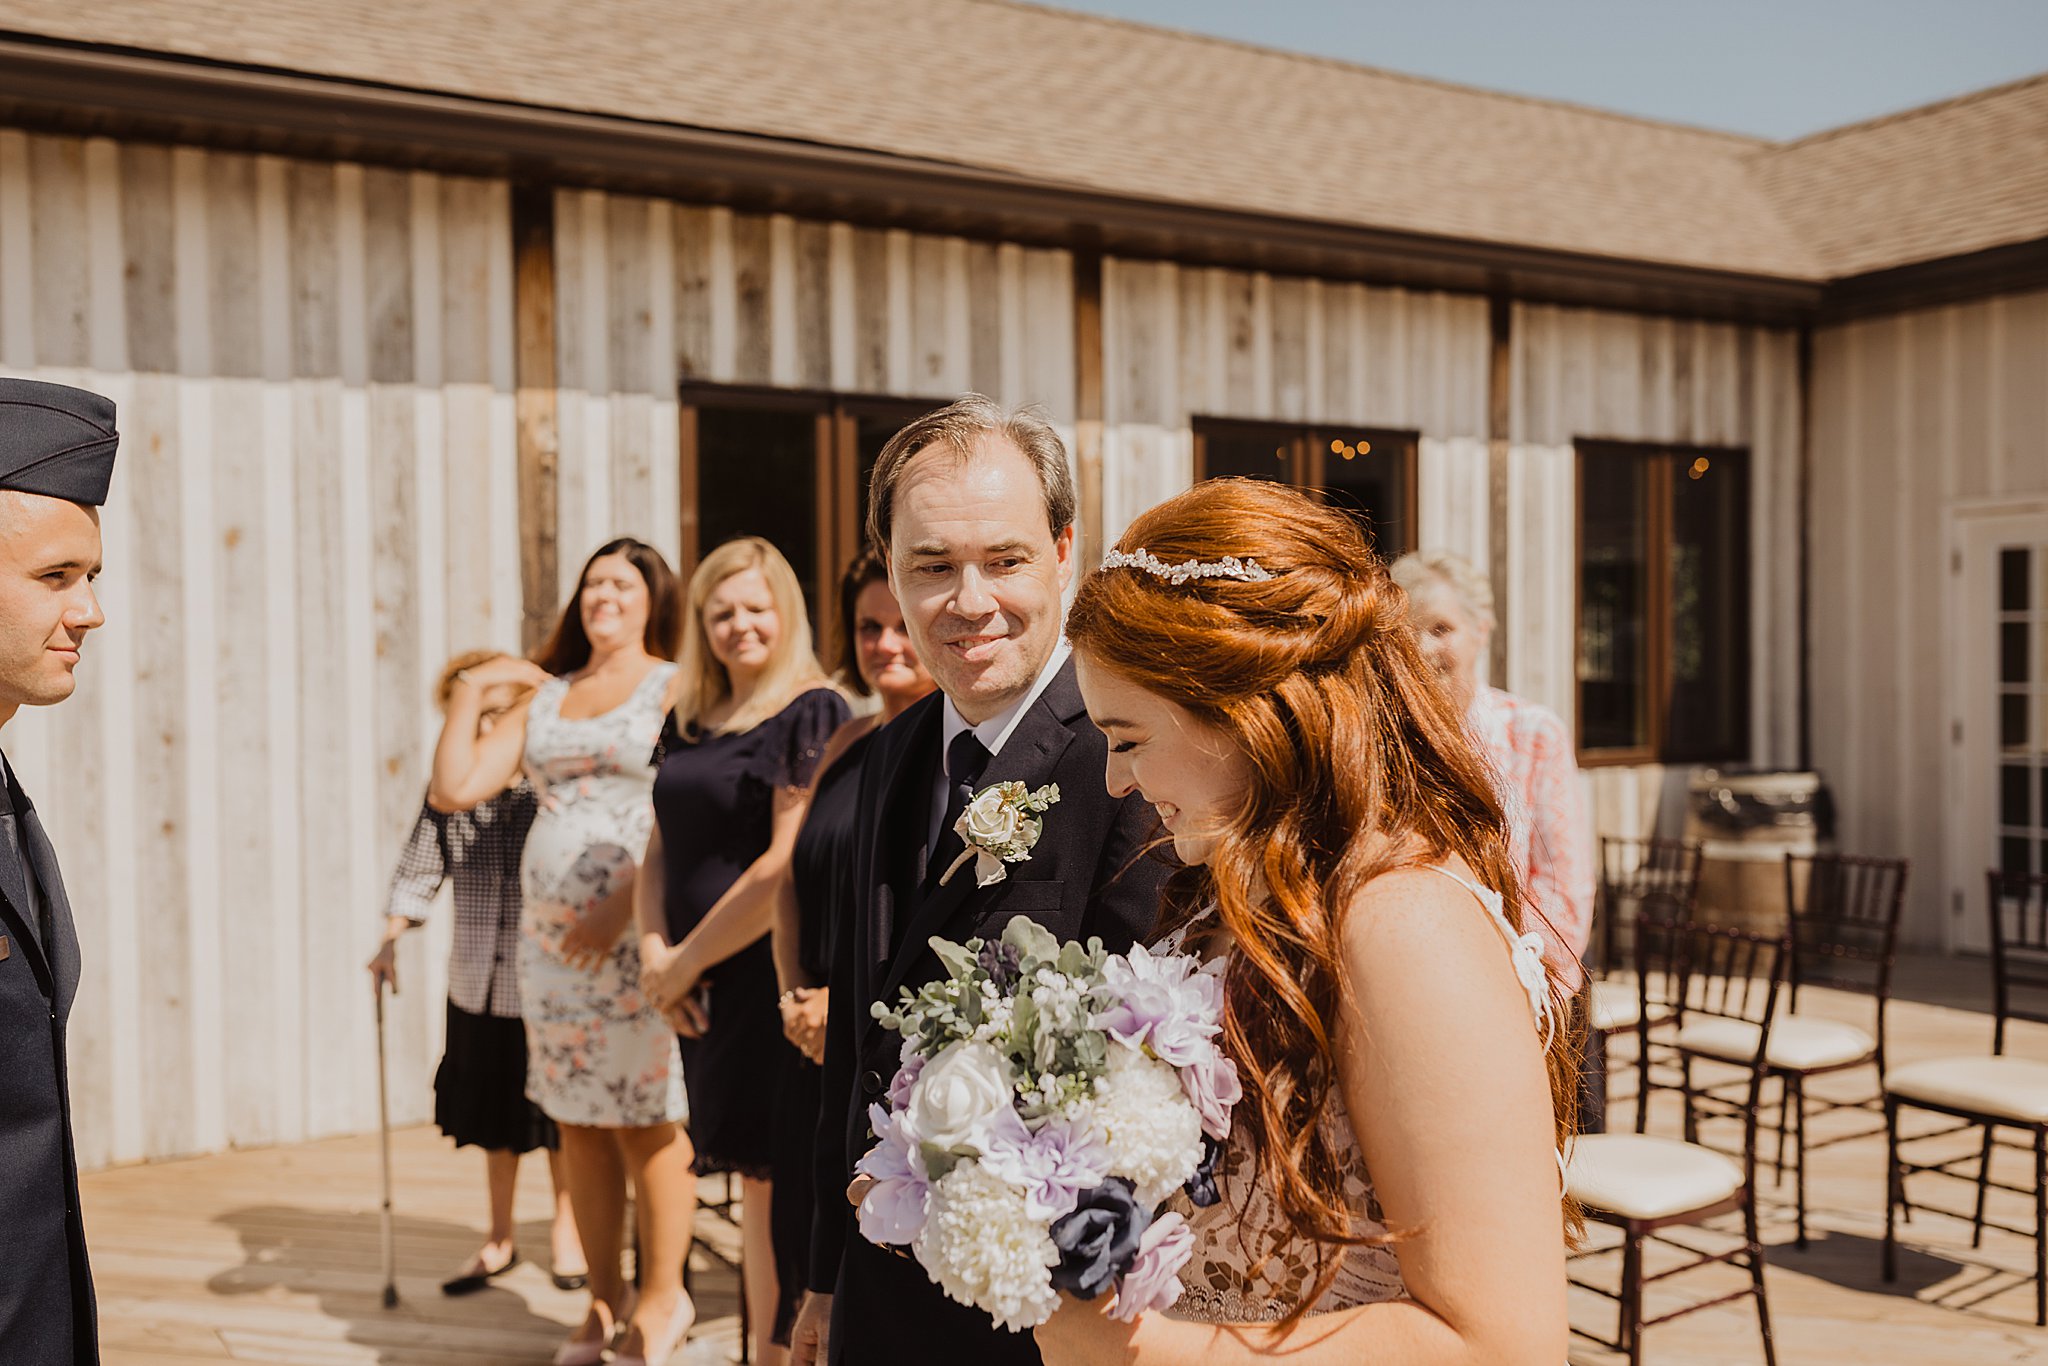 Chaumette Winery Wedding Ceremony | Bride walking down the aisle